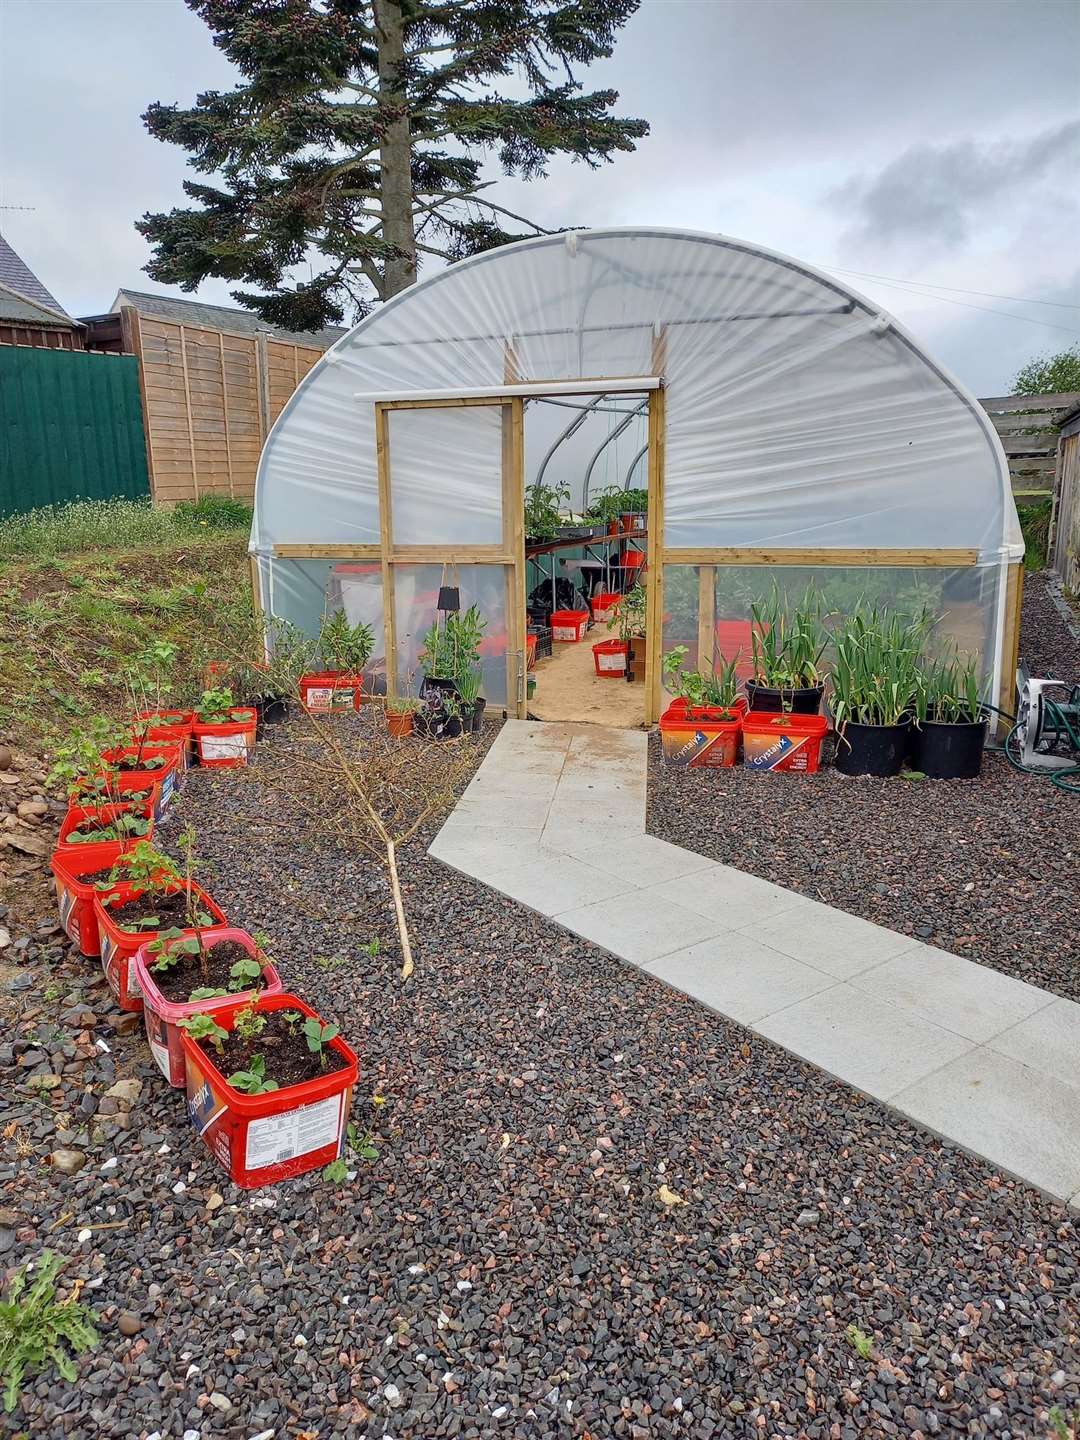 The Kyle of Sutherland Development Trust already has a polytunnel, but is now set to develop a community kitchen garden.